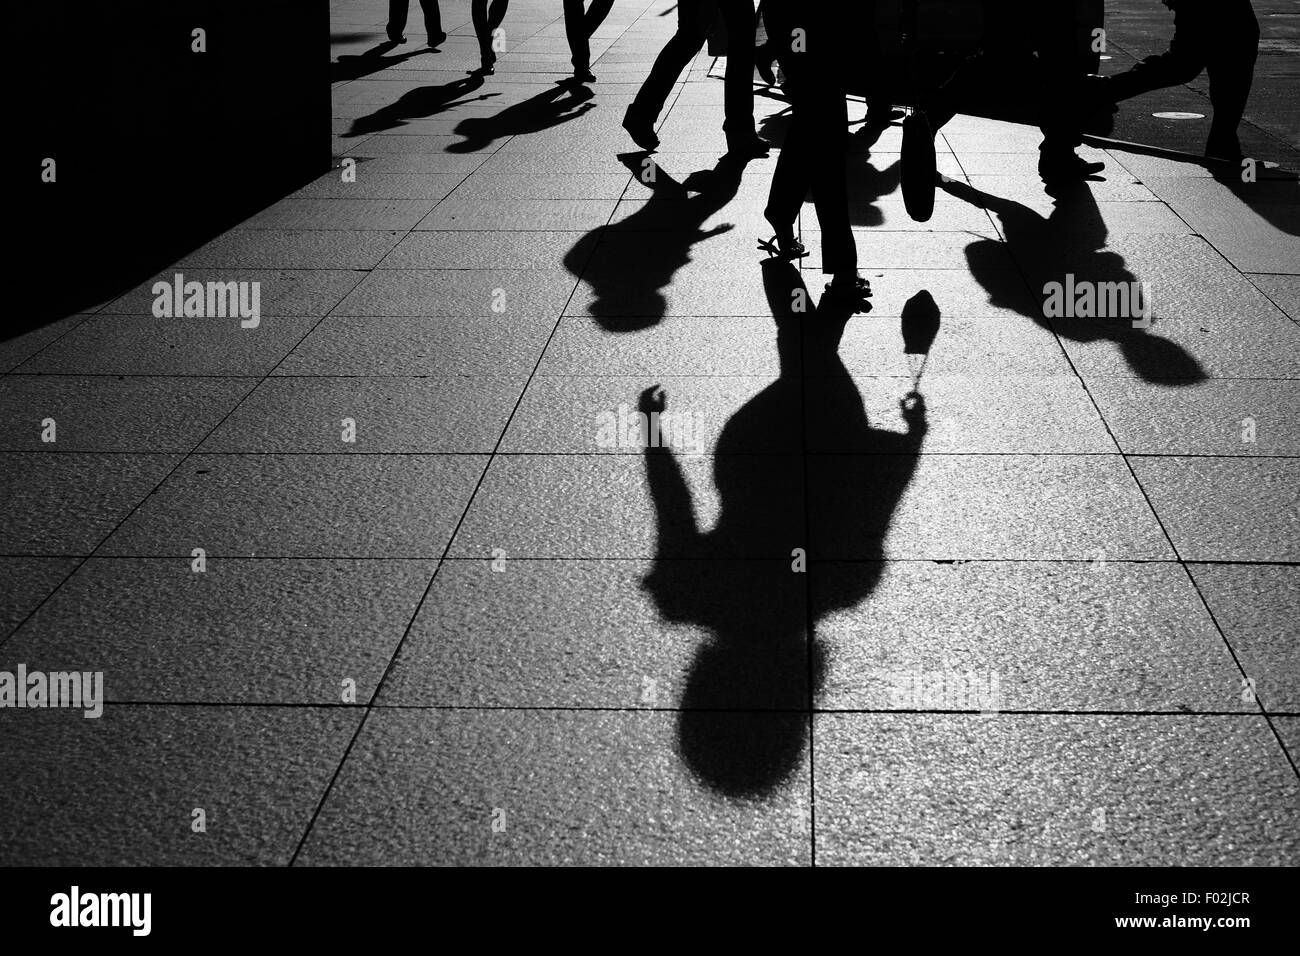 Shadows and Silhouettes of people walking on street in city Stock Photo